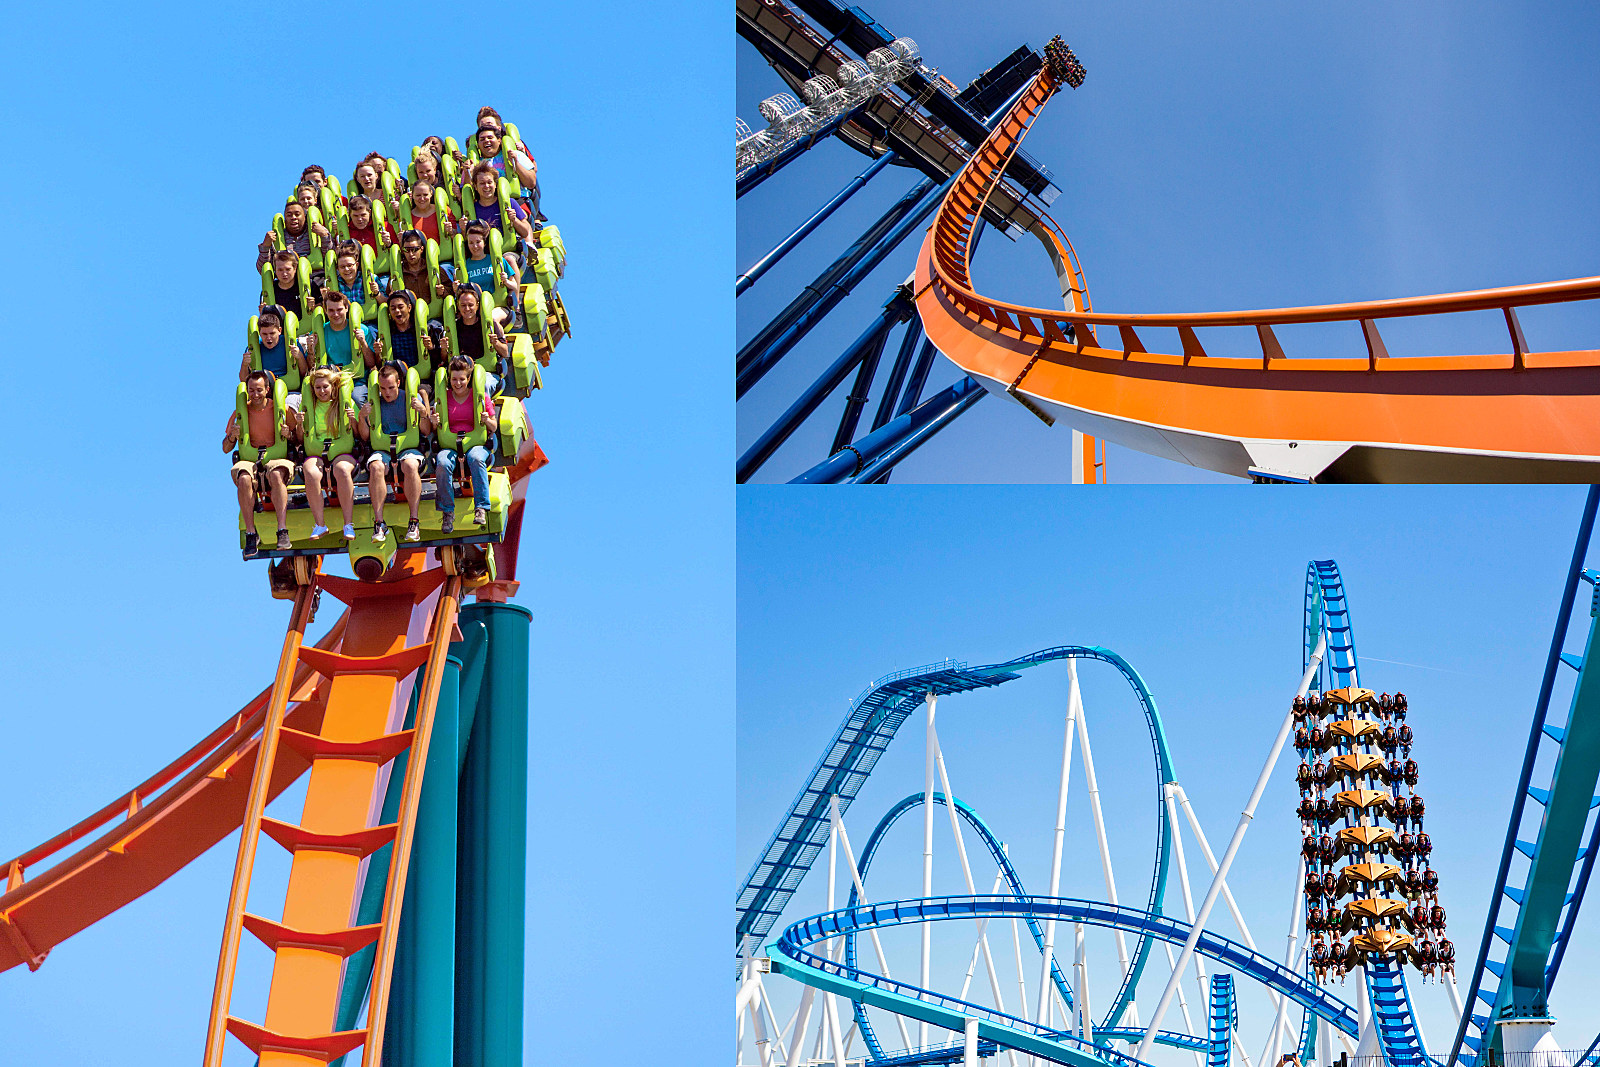 How Many of Cedar Point's 17 Roller Coasters Have You Been On?